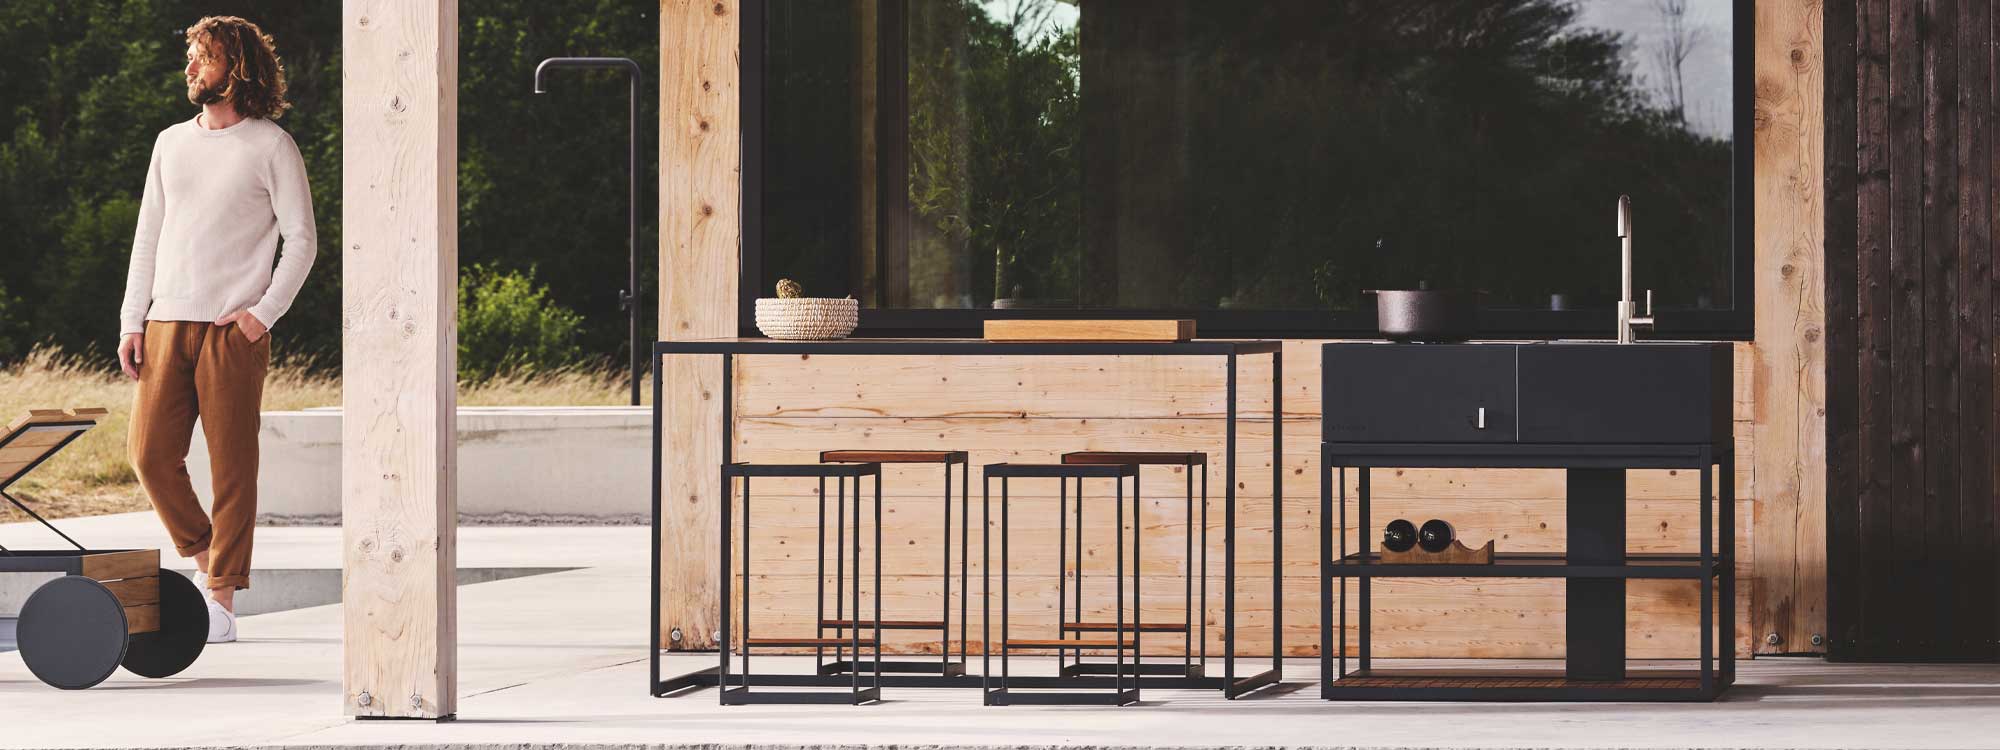 Image of bearded Swedish hipster walking past Roshults Open Bistro high bar table and bar stools shown next to Open Kitchen garden kitchen and bbq